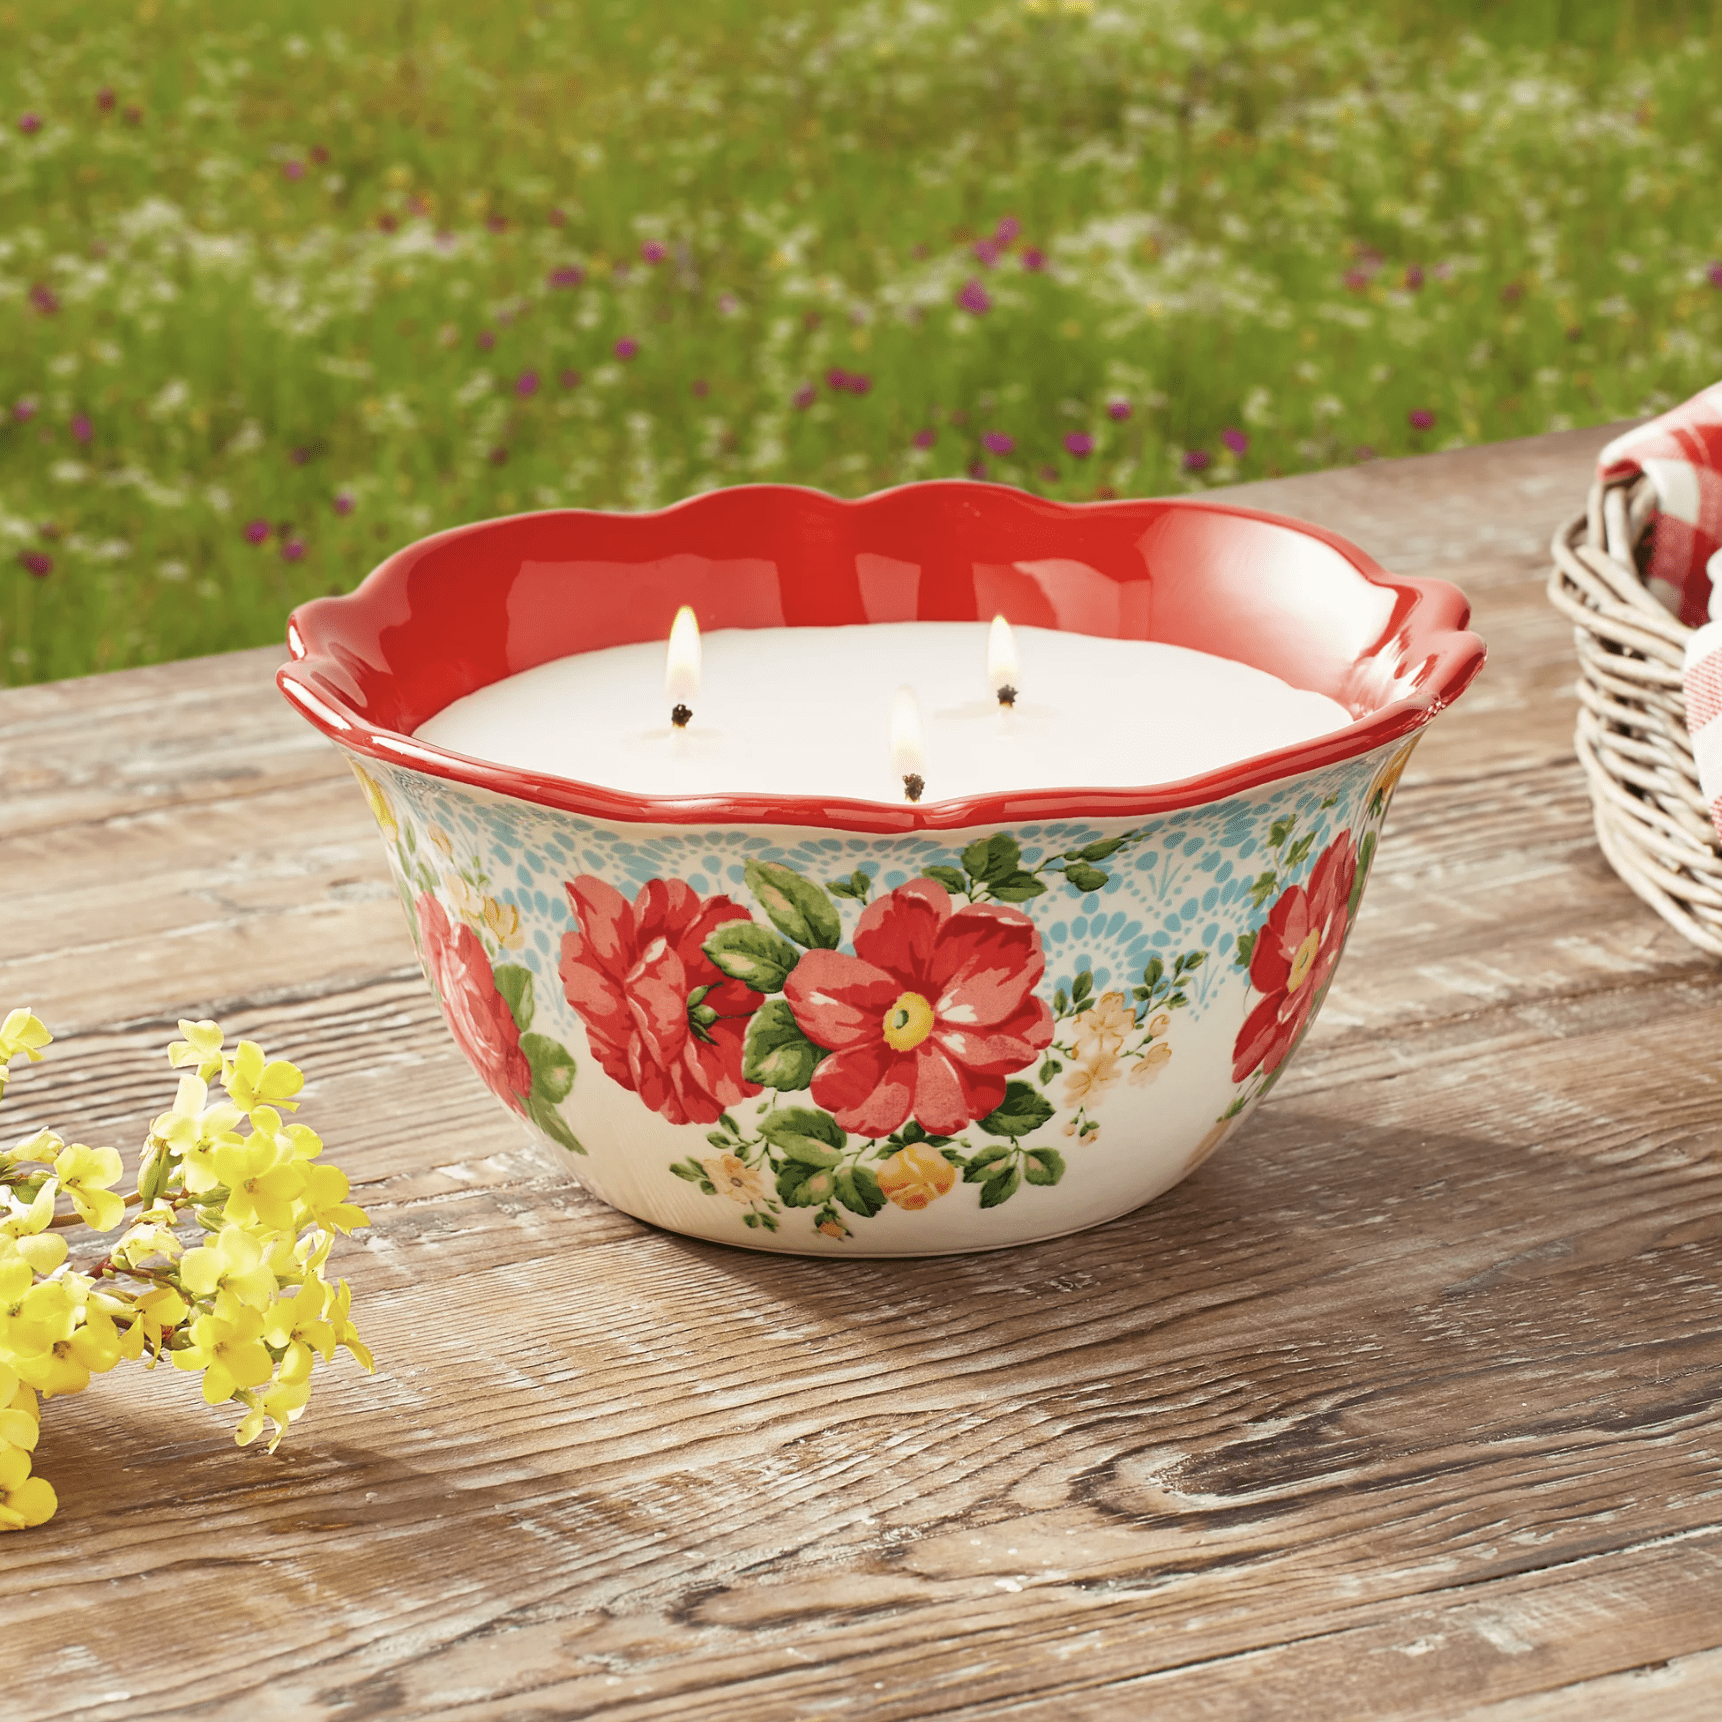 https://www.tasteofhome.com/wp-content/uploads/2023/04/pioneer-woman-outdoor-candle-ecomm-via-walmart-e1681391753363.png?fit=700%2C700